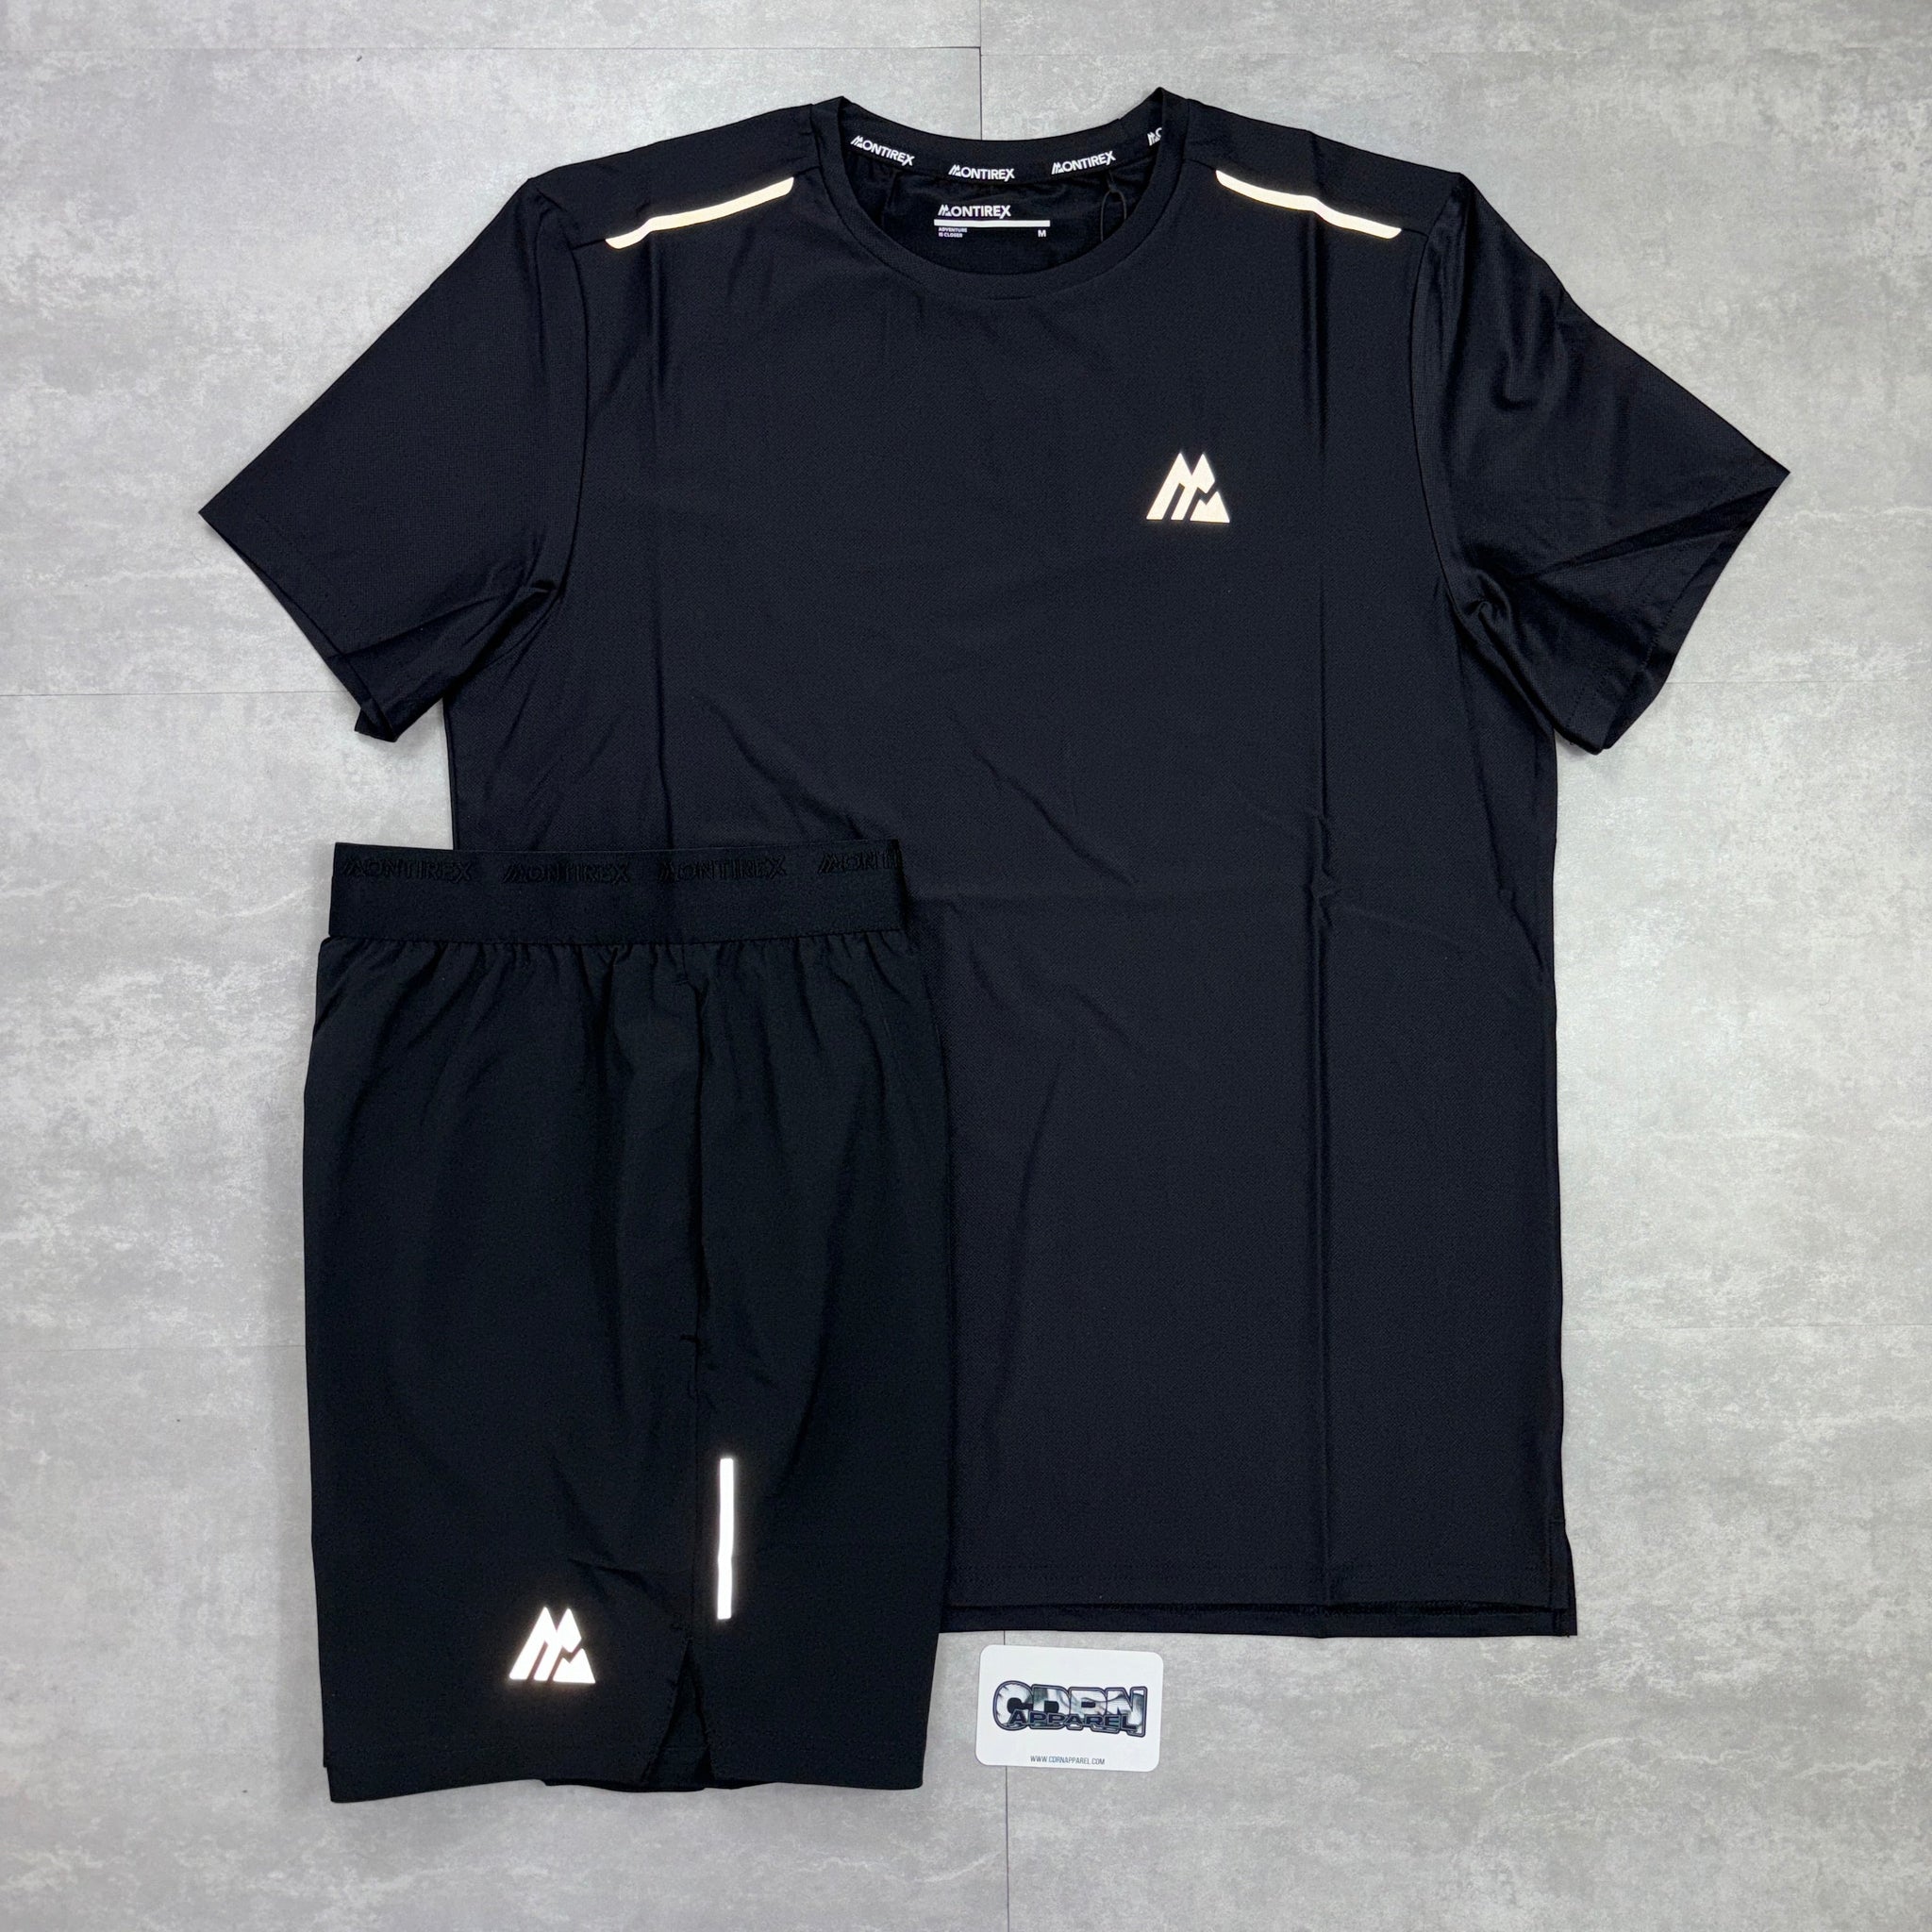 Montirex Black Charge T-Shirt & Black Fly Shorts